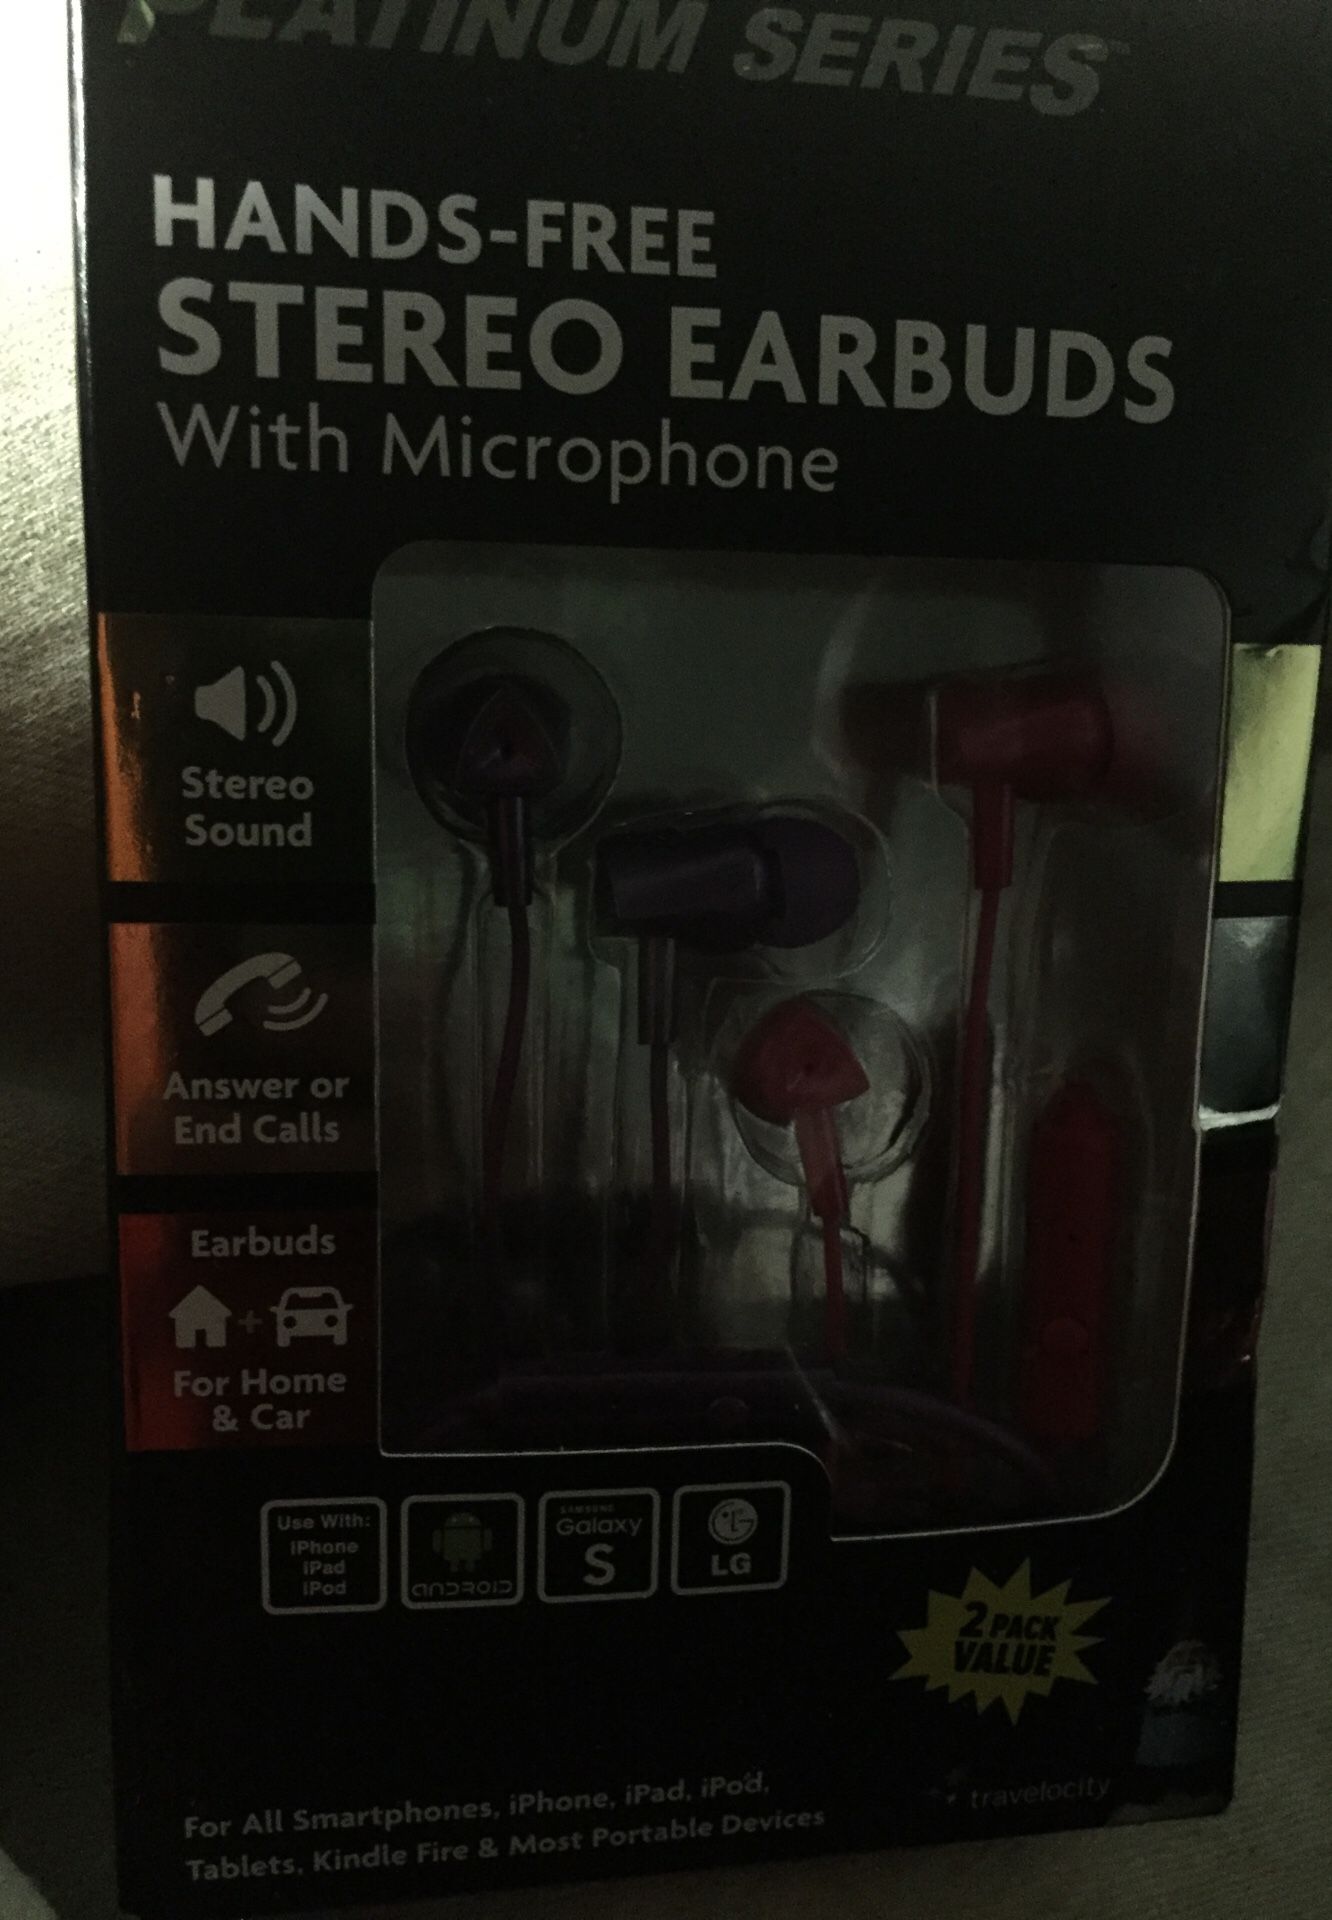 Earbuds with microphone. Hands free with wires.